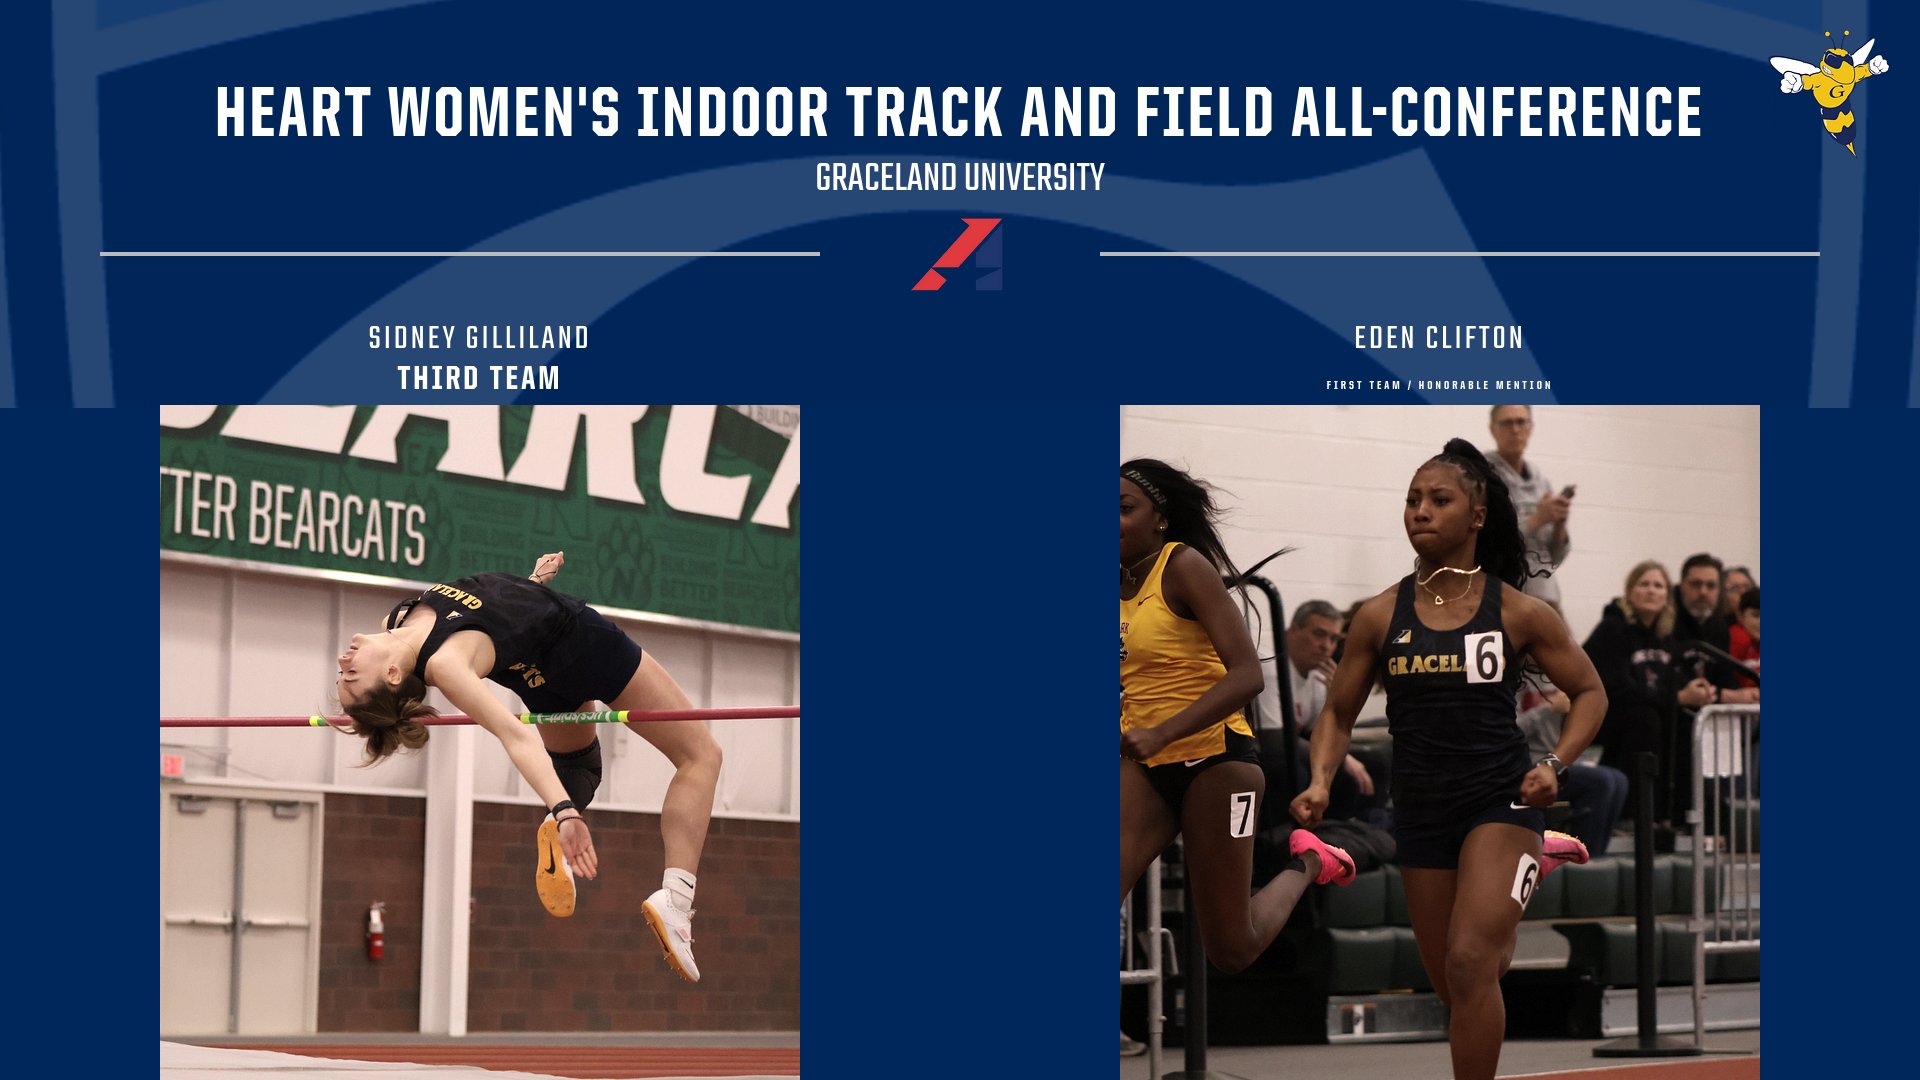 Clifton and Gilliland Named Heart Women’s Indoor Track and Field All-Conference